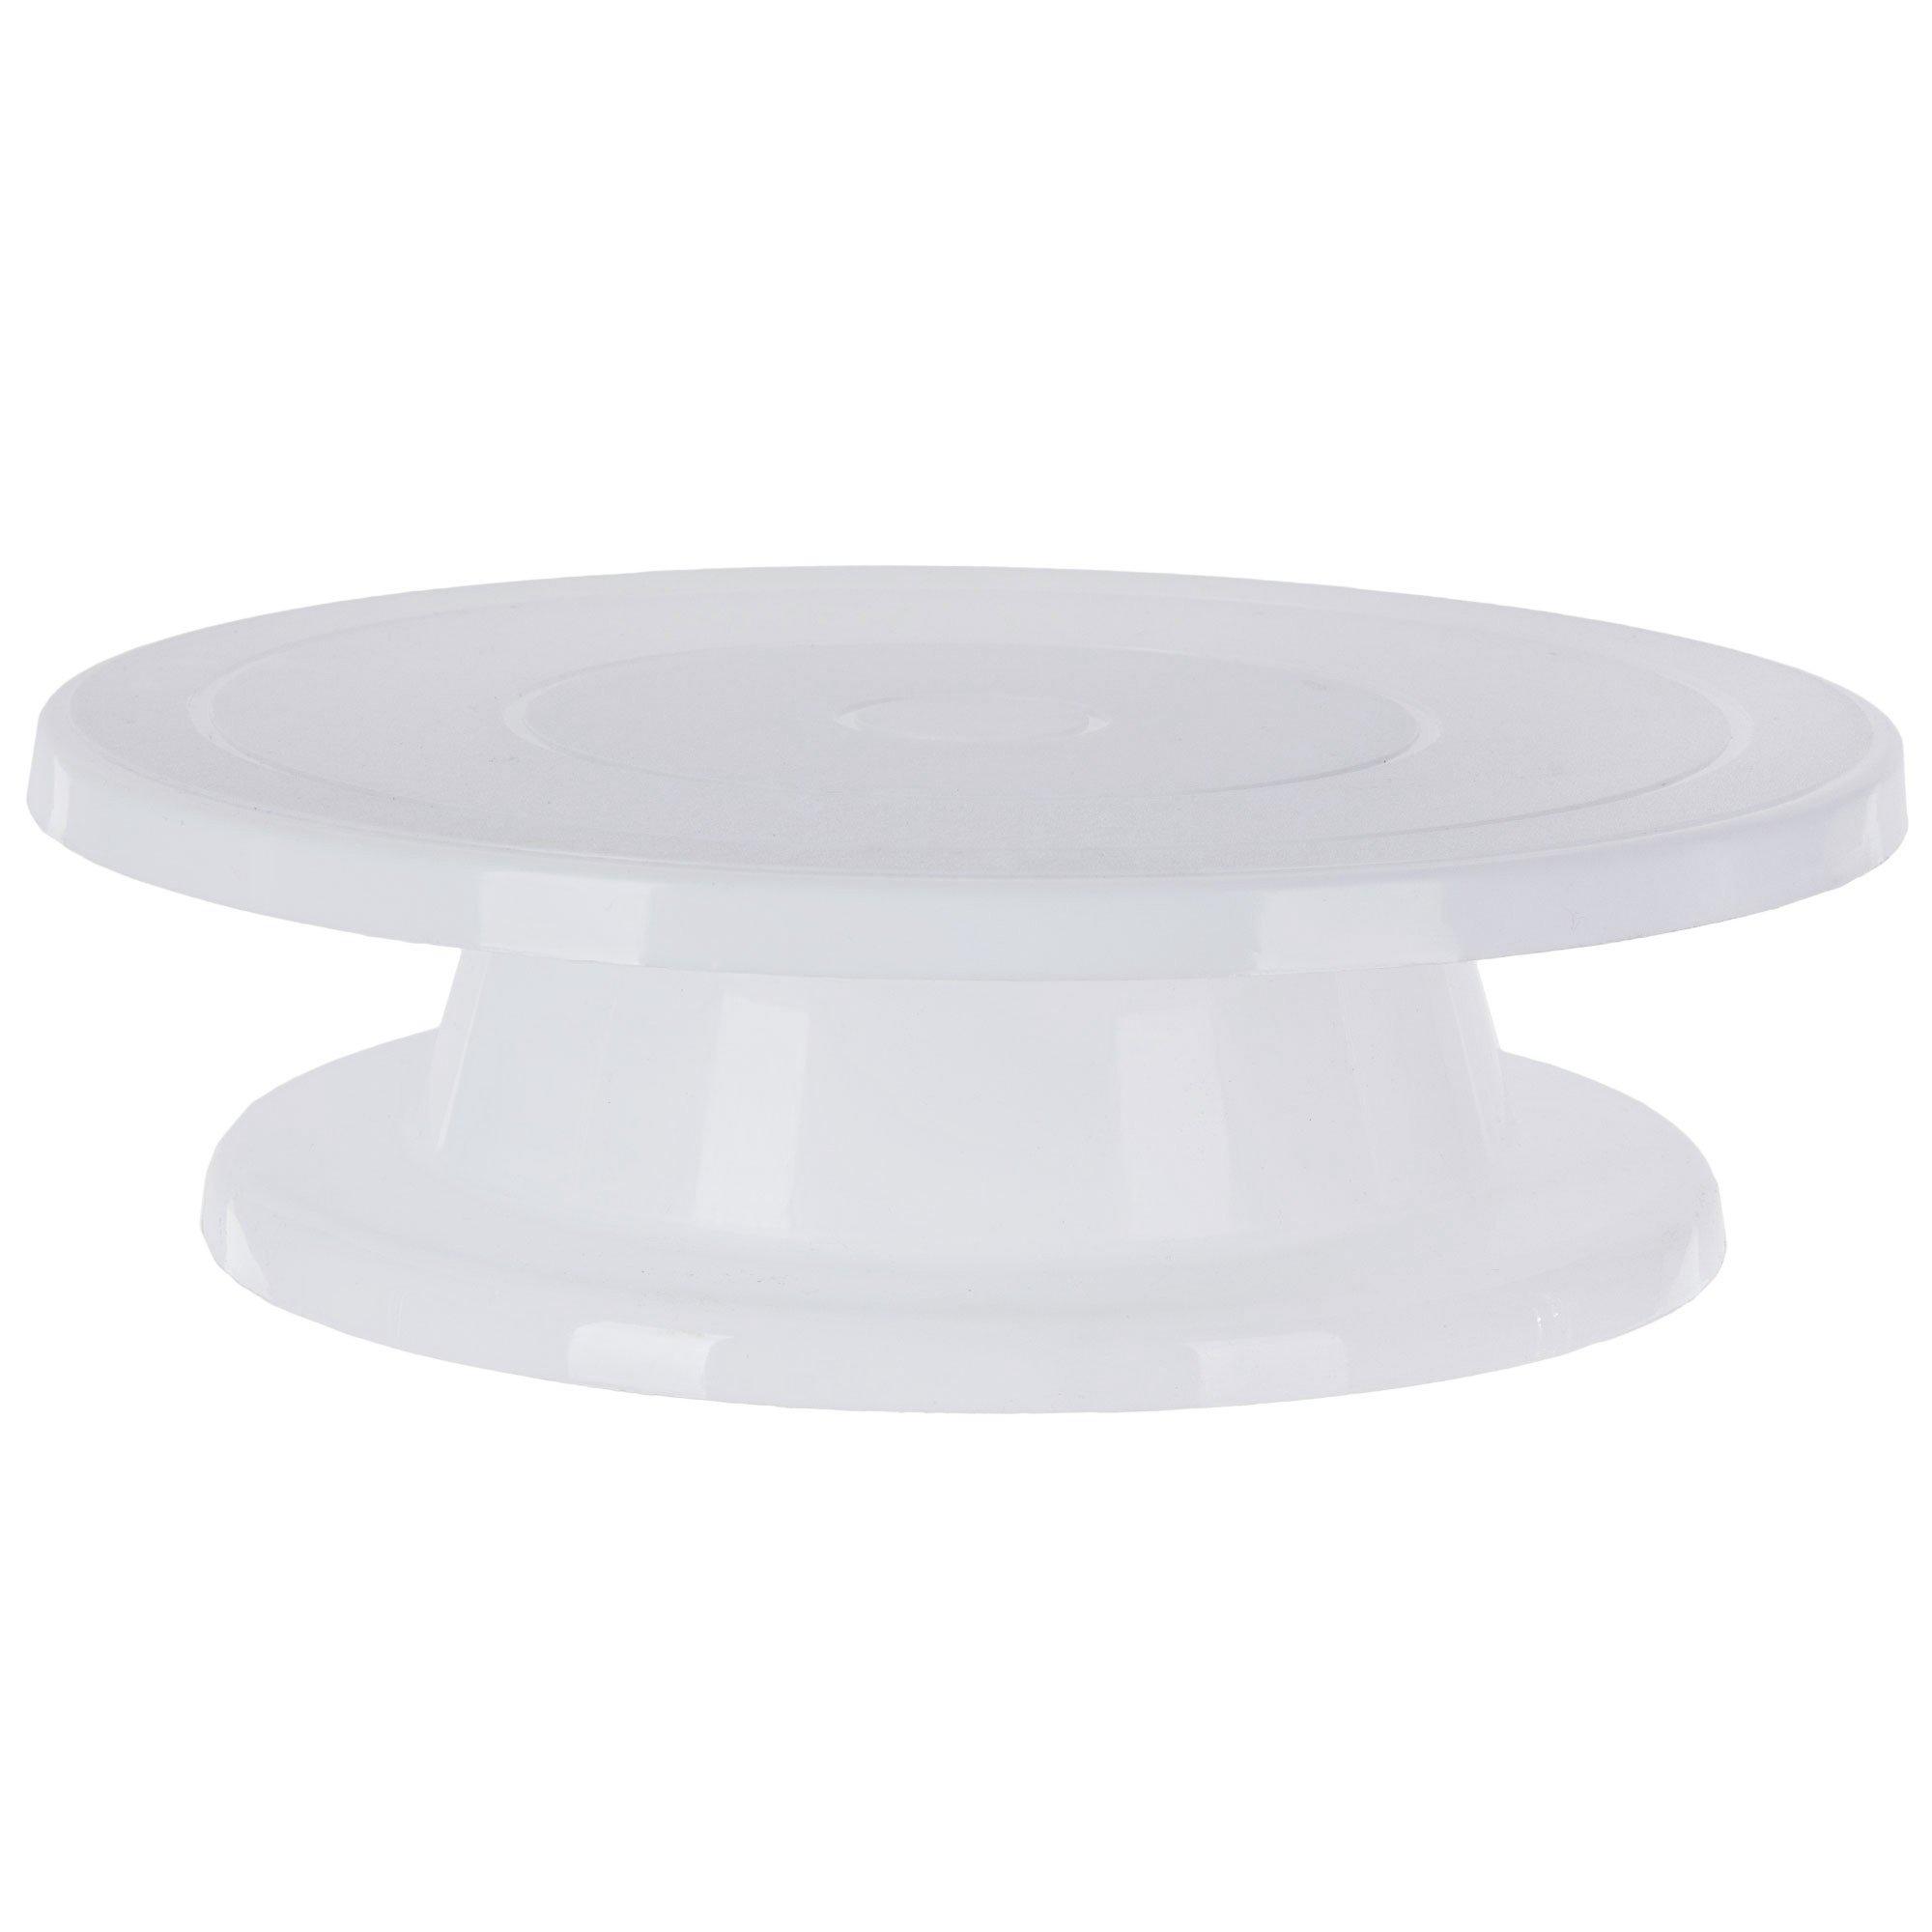 Cake Decorating Stand, 10 Inch Round Aluminum Revolving Cake Decorating  Stand Revolving Cake Turntable for Home Cake Decorating Supplies (White)